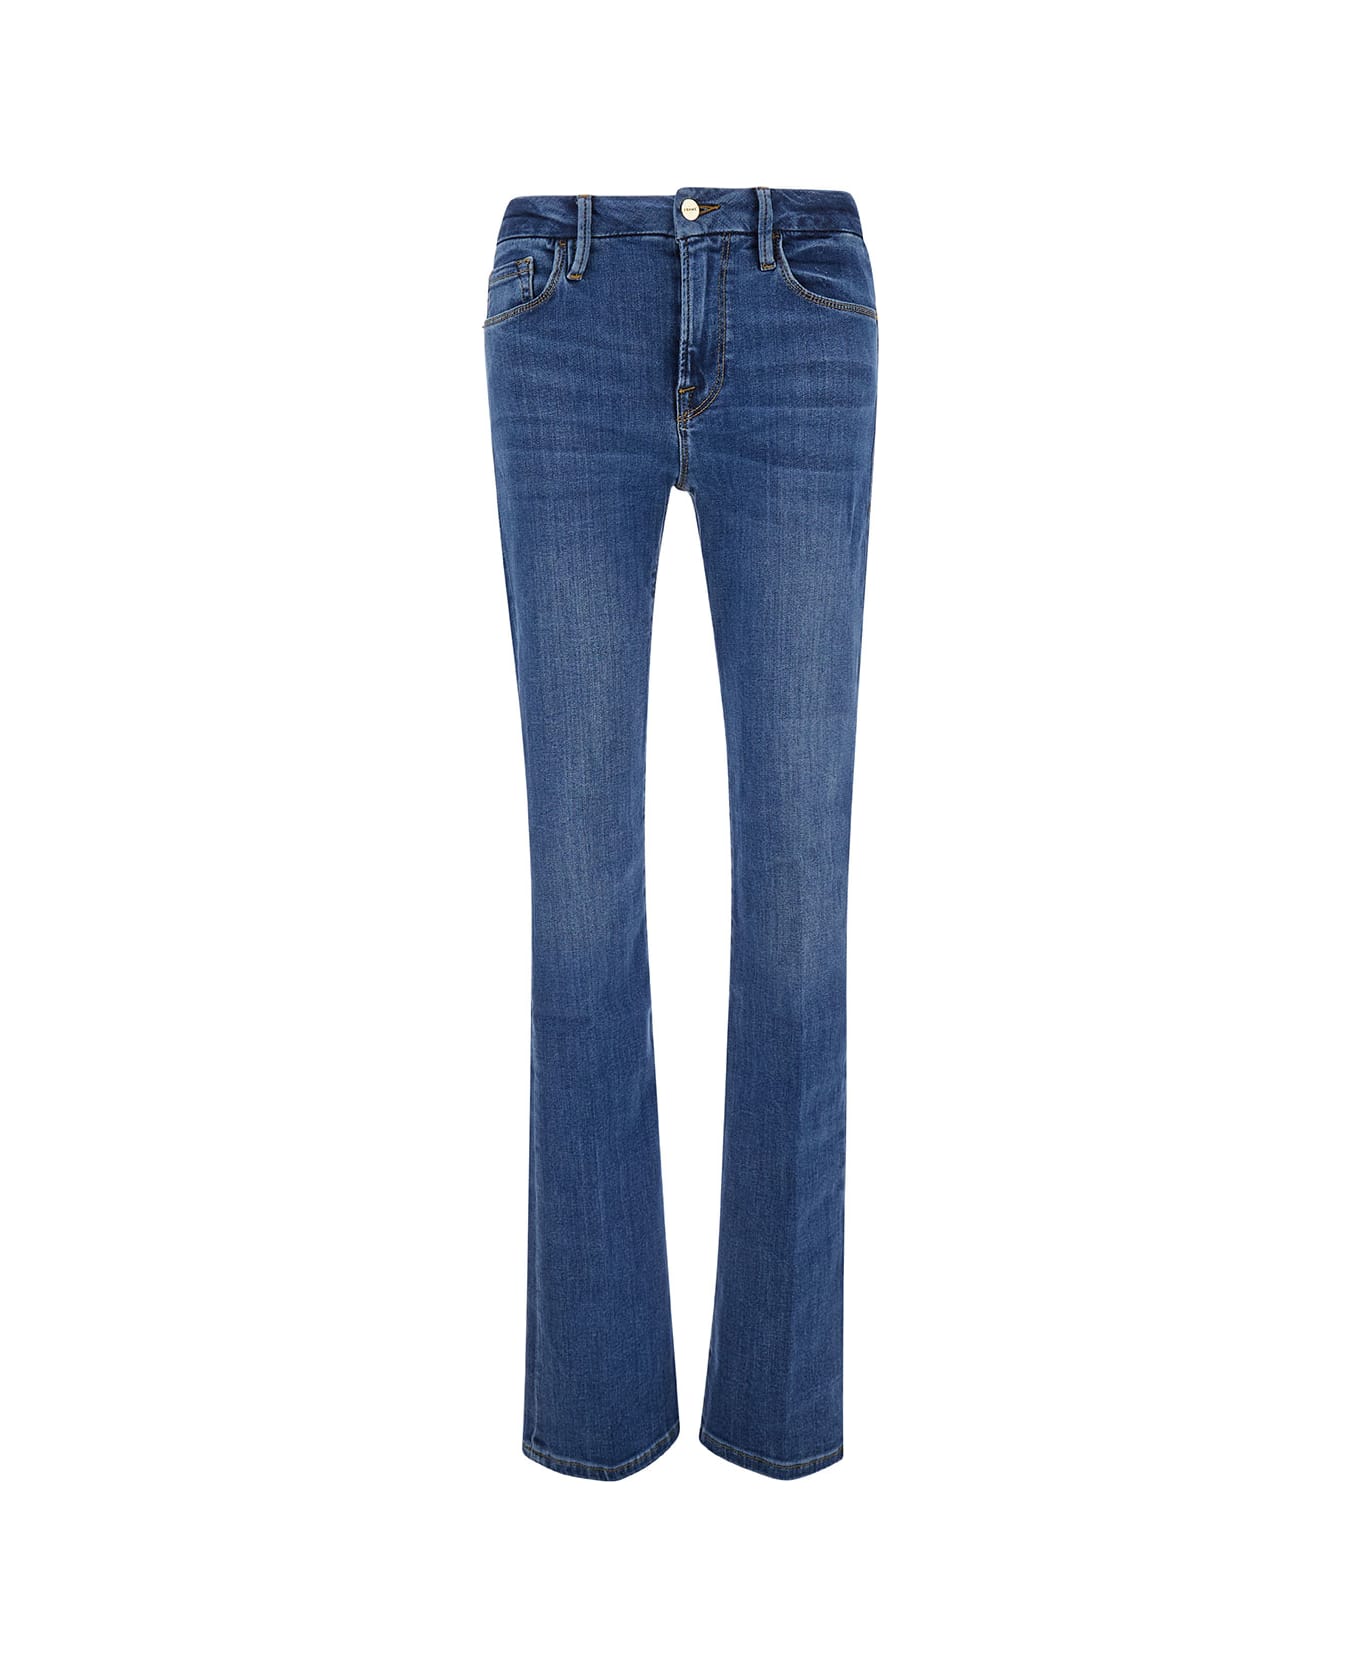 Frame 'mini Boot' Blue Flared Jeans With Branded Button In Cotton Blend Denim Woman - Blu デニム